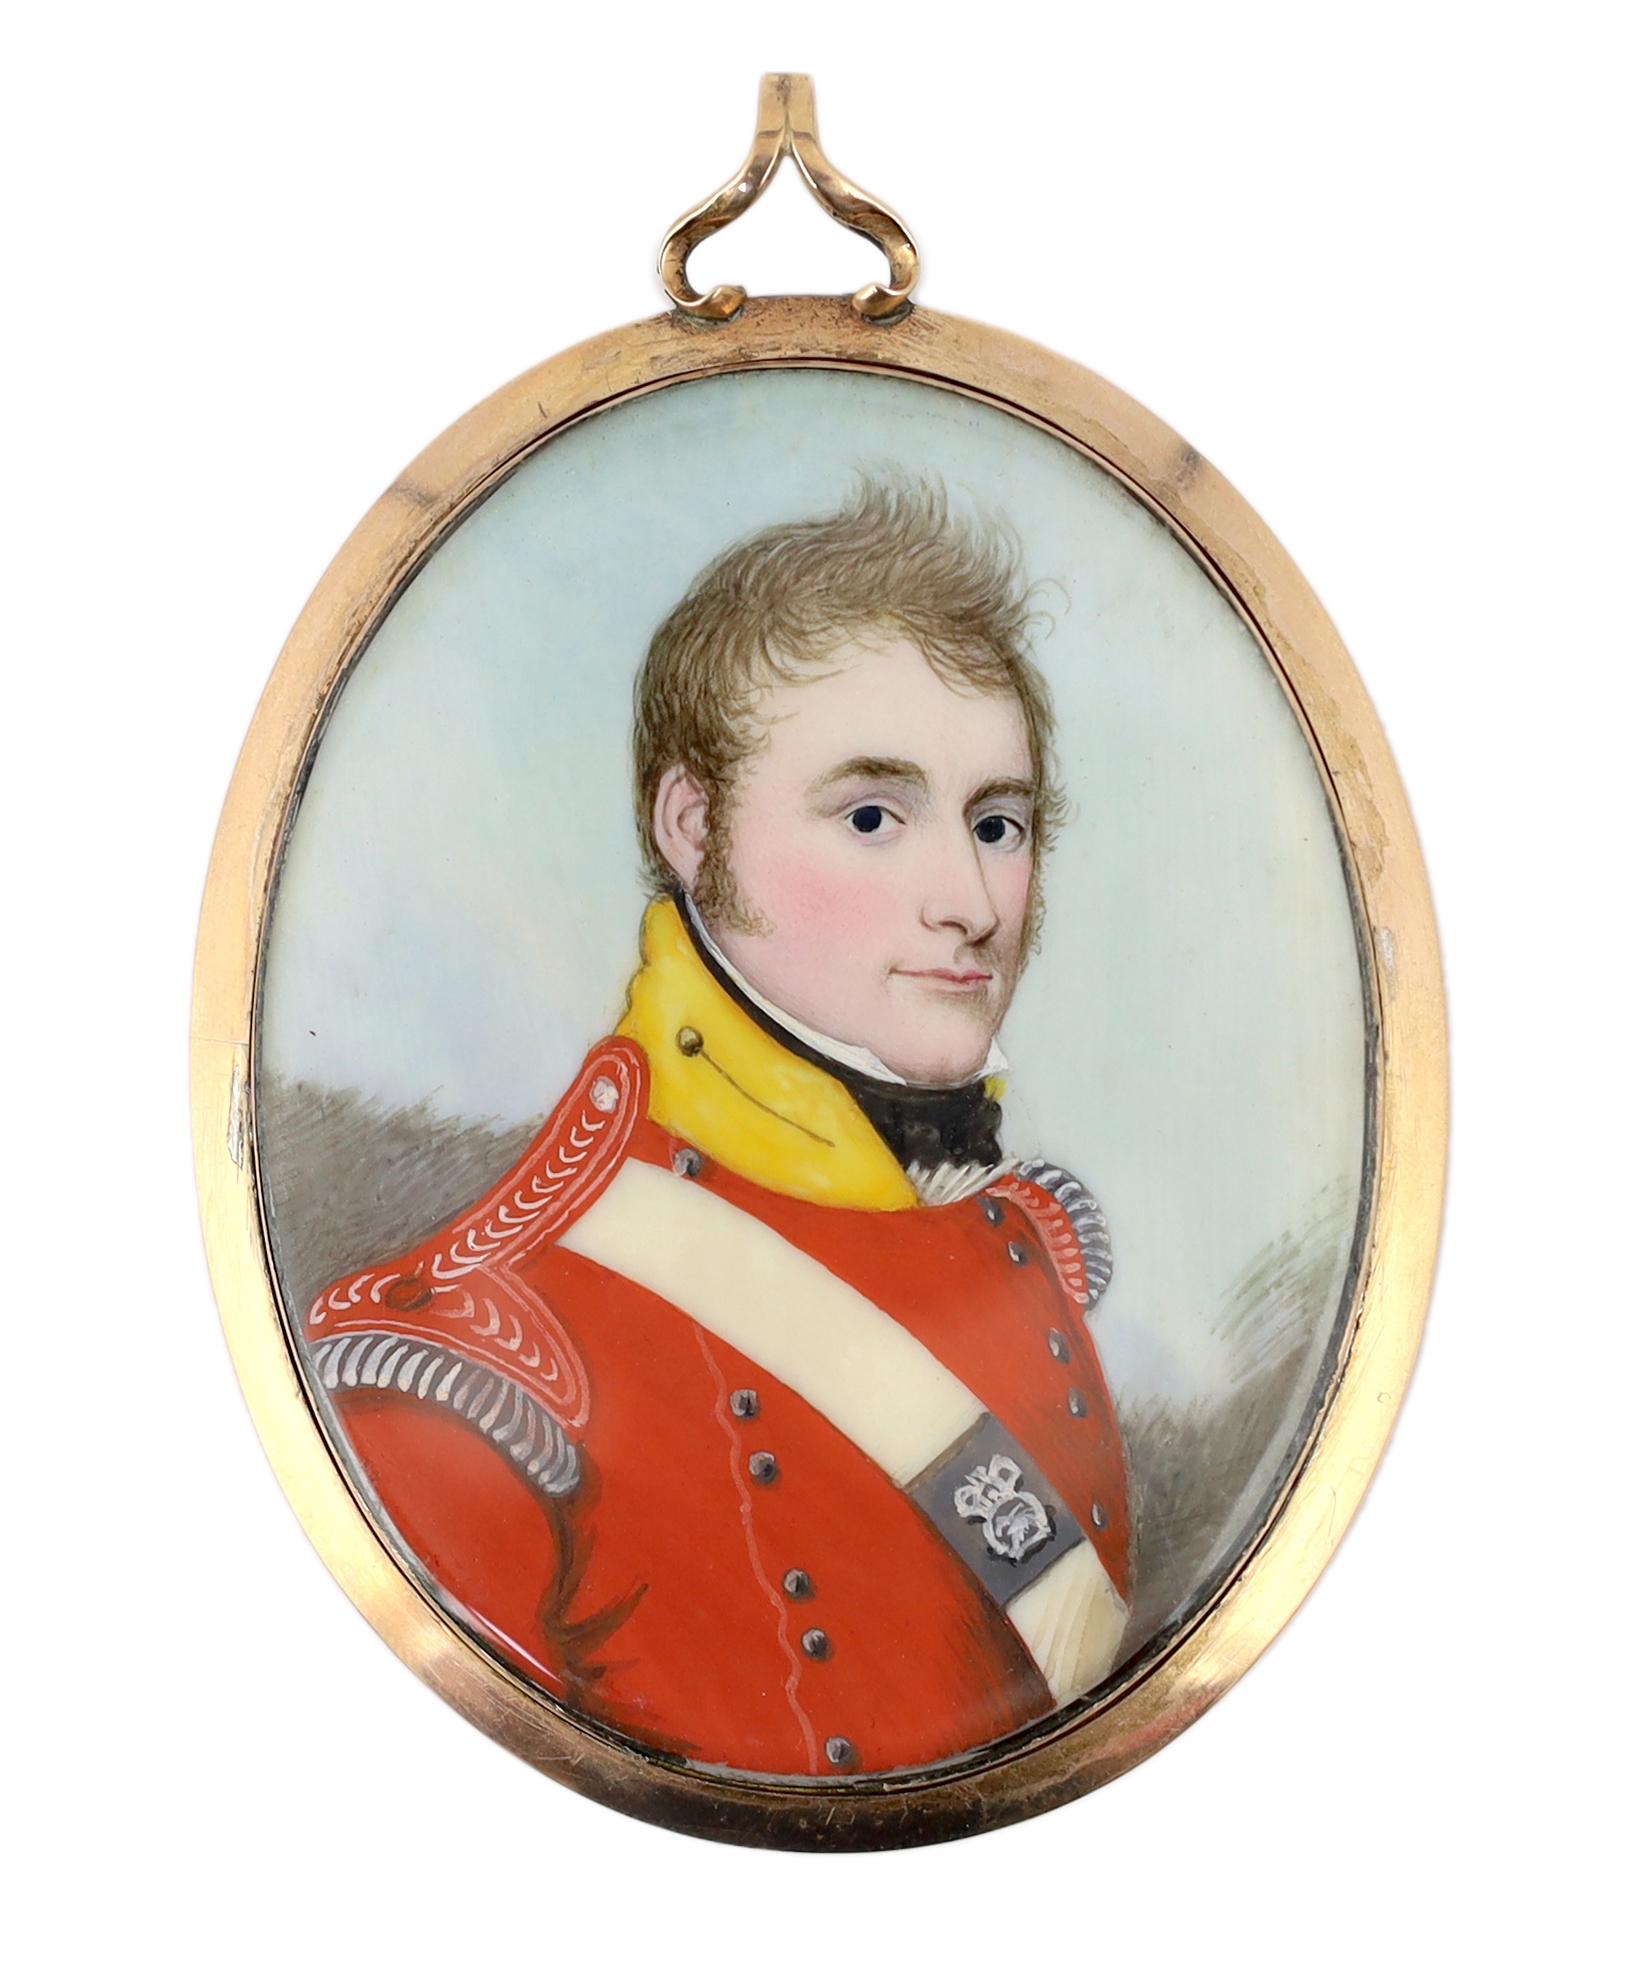 Frederick Buck (Irish, 1771-1840), Portrait miniature of an army officer, watercolour on ivory, 6.5 x 5cm. CITES Submission reference 71XFZQZR